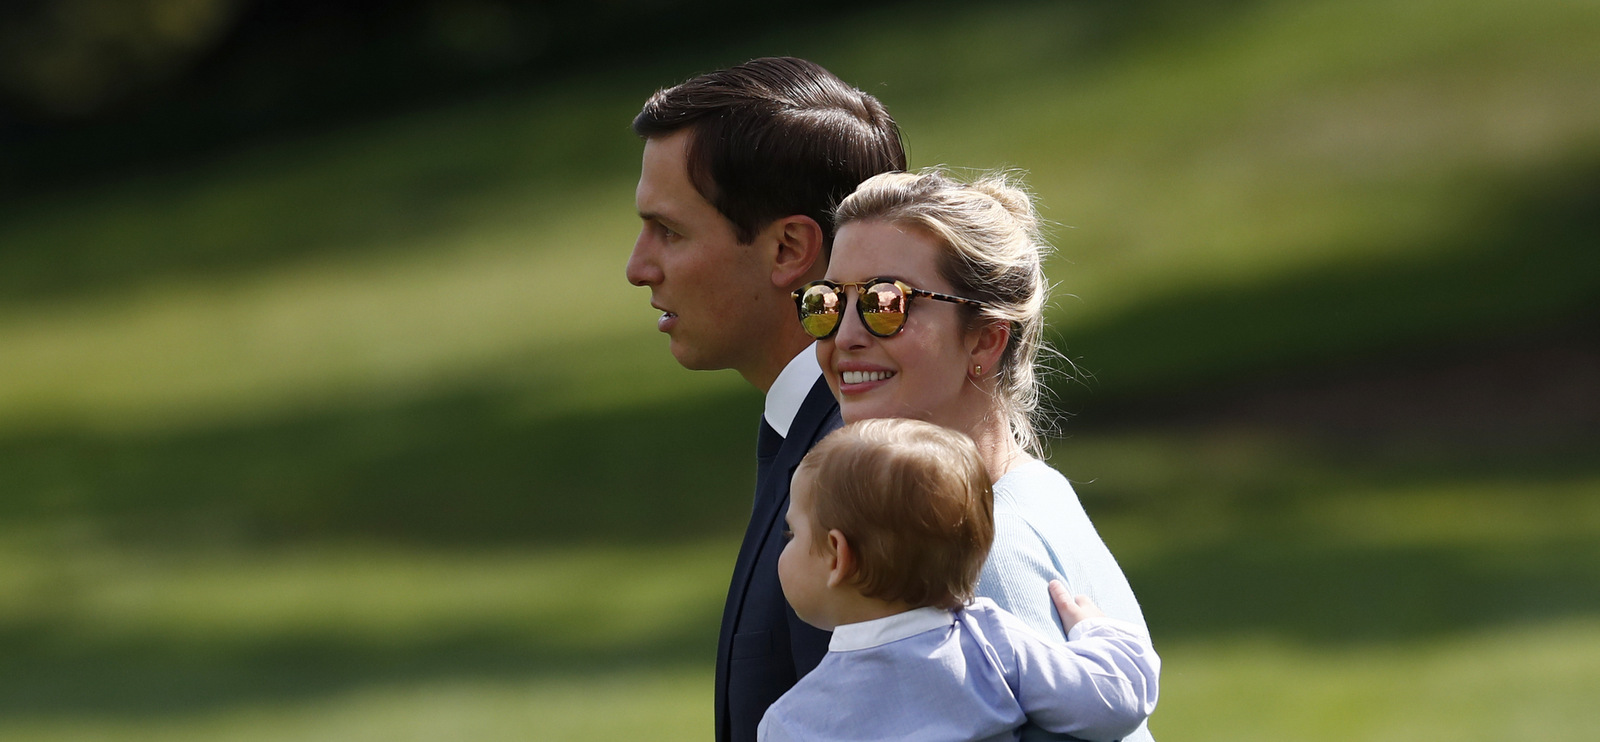 Ivanka Trump, the daughter of President Donald Trump, her husband White House senior adviser, Jared Kushner, and their son Theodore Kushner walk on the South Lawn of the White House Washington, Friday, Aug. 25, 2017, to Marine One en route to Camp David, Md. (AP/Carolyn Kaster)